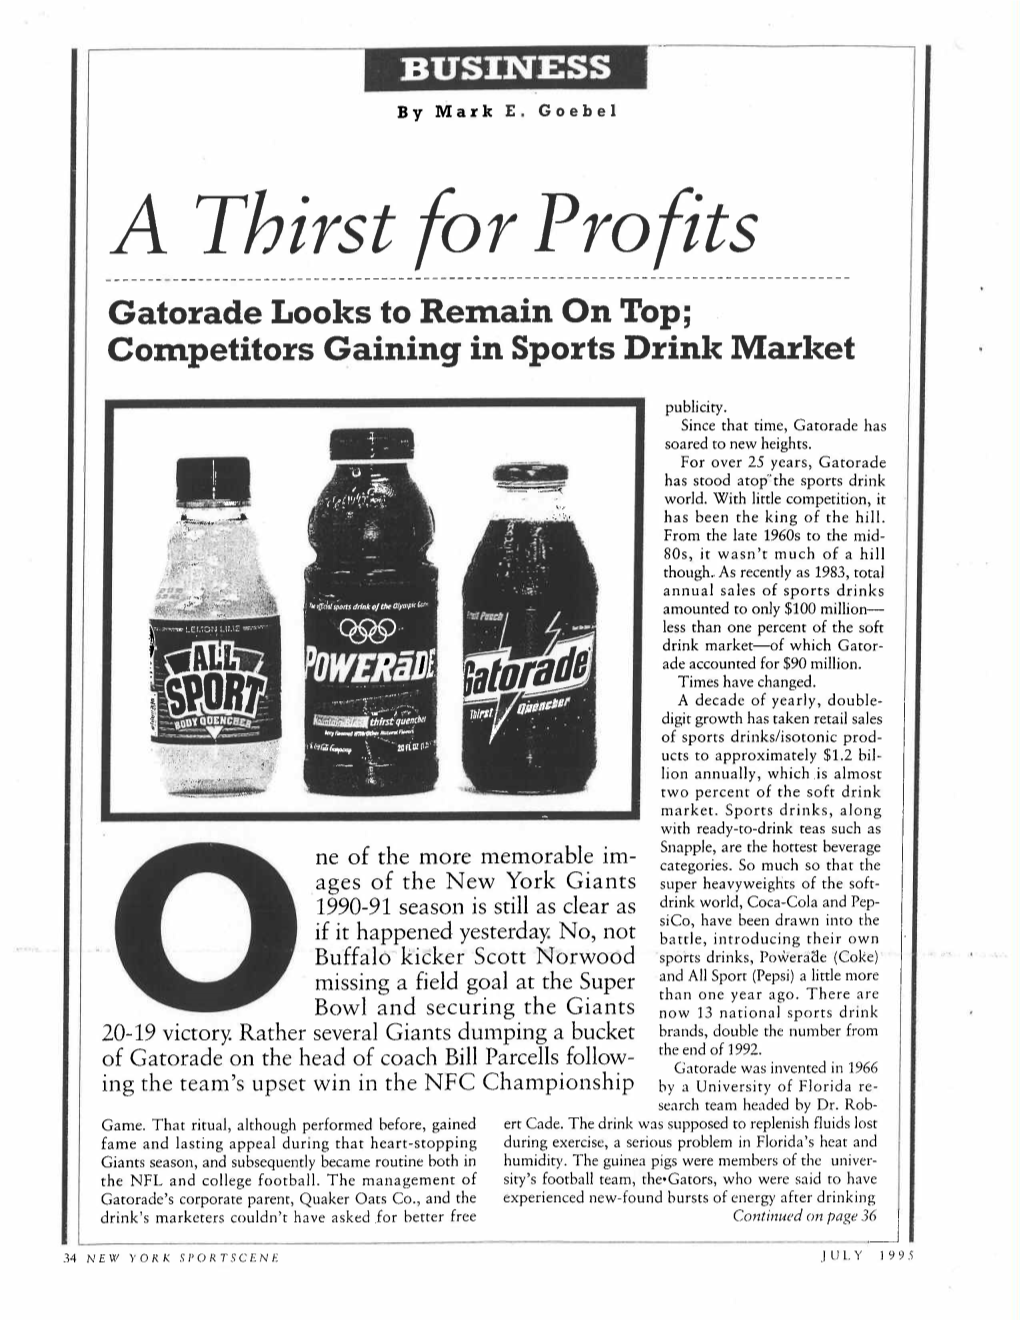 A Thirst for Profits Gatorade Looks to Remain on Top; Competitors Gaining in Sports Drink Market